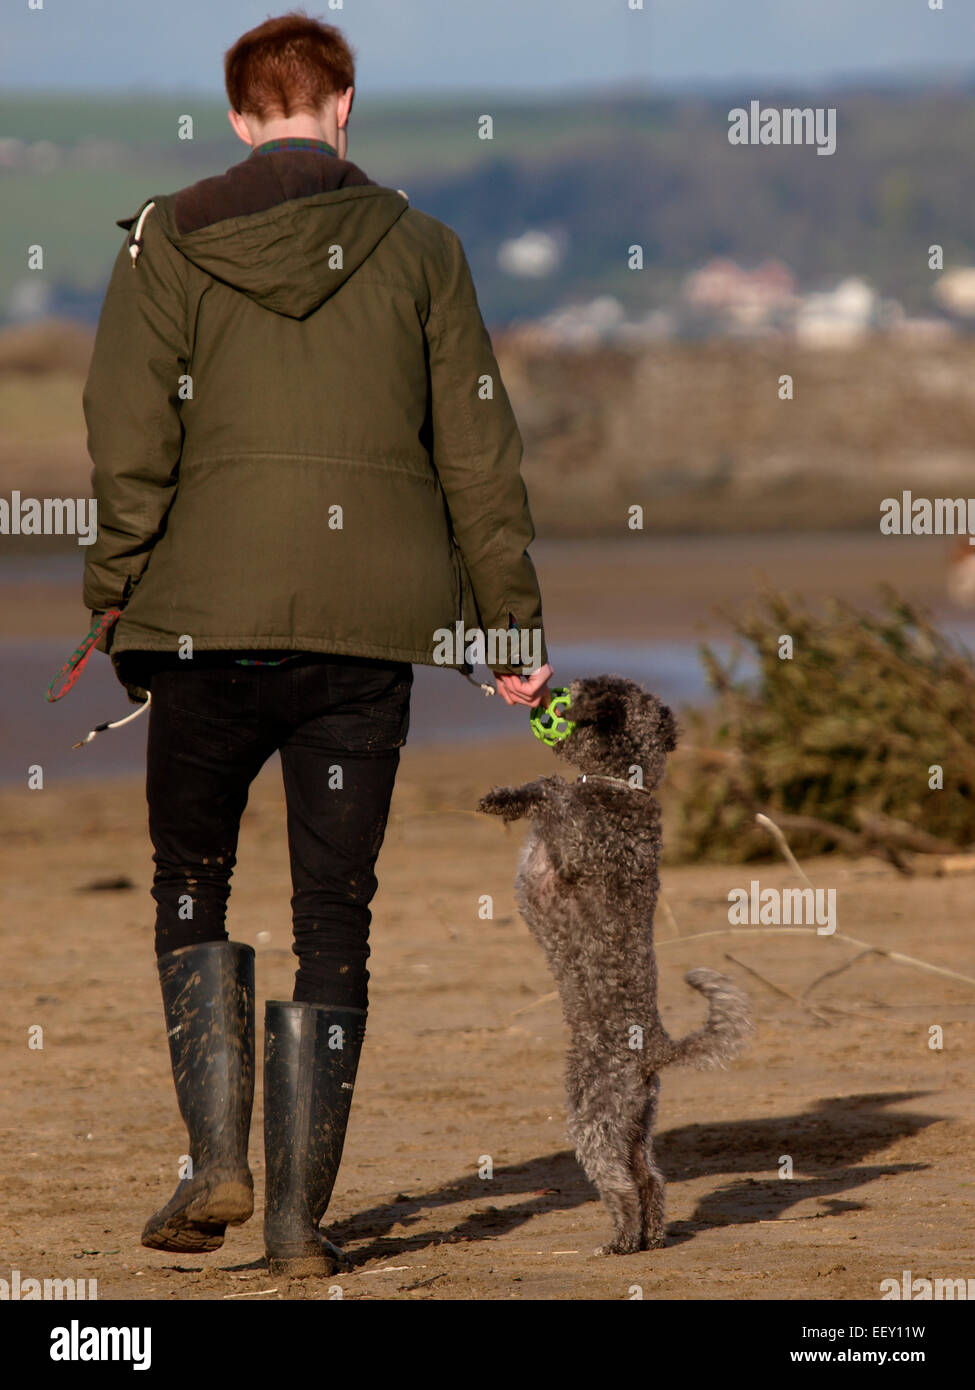 Dog standing on back legs to reach ball held by owner, UK Stock Photo